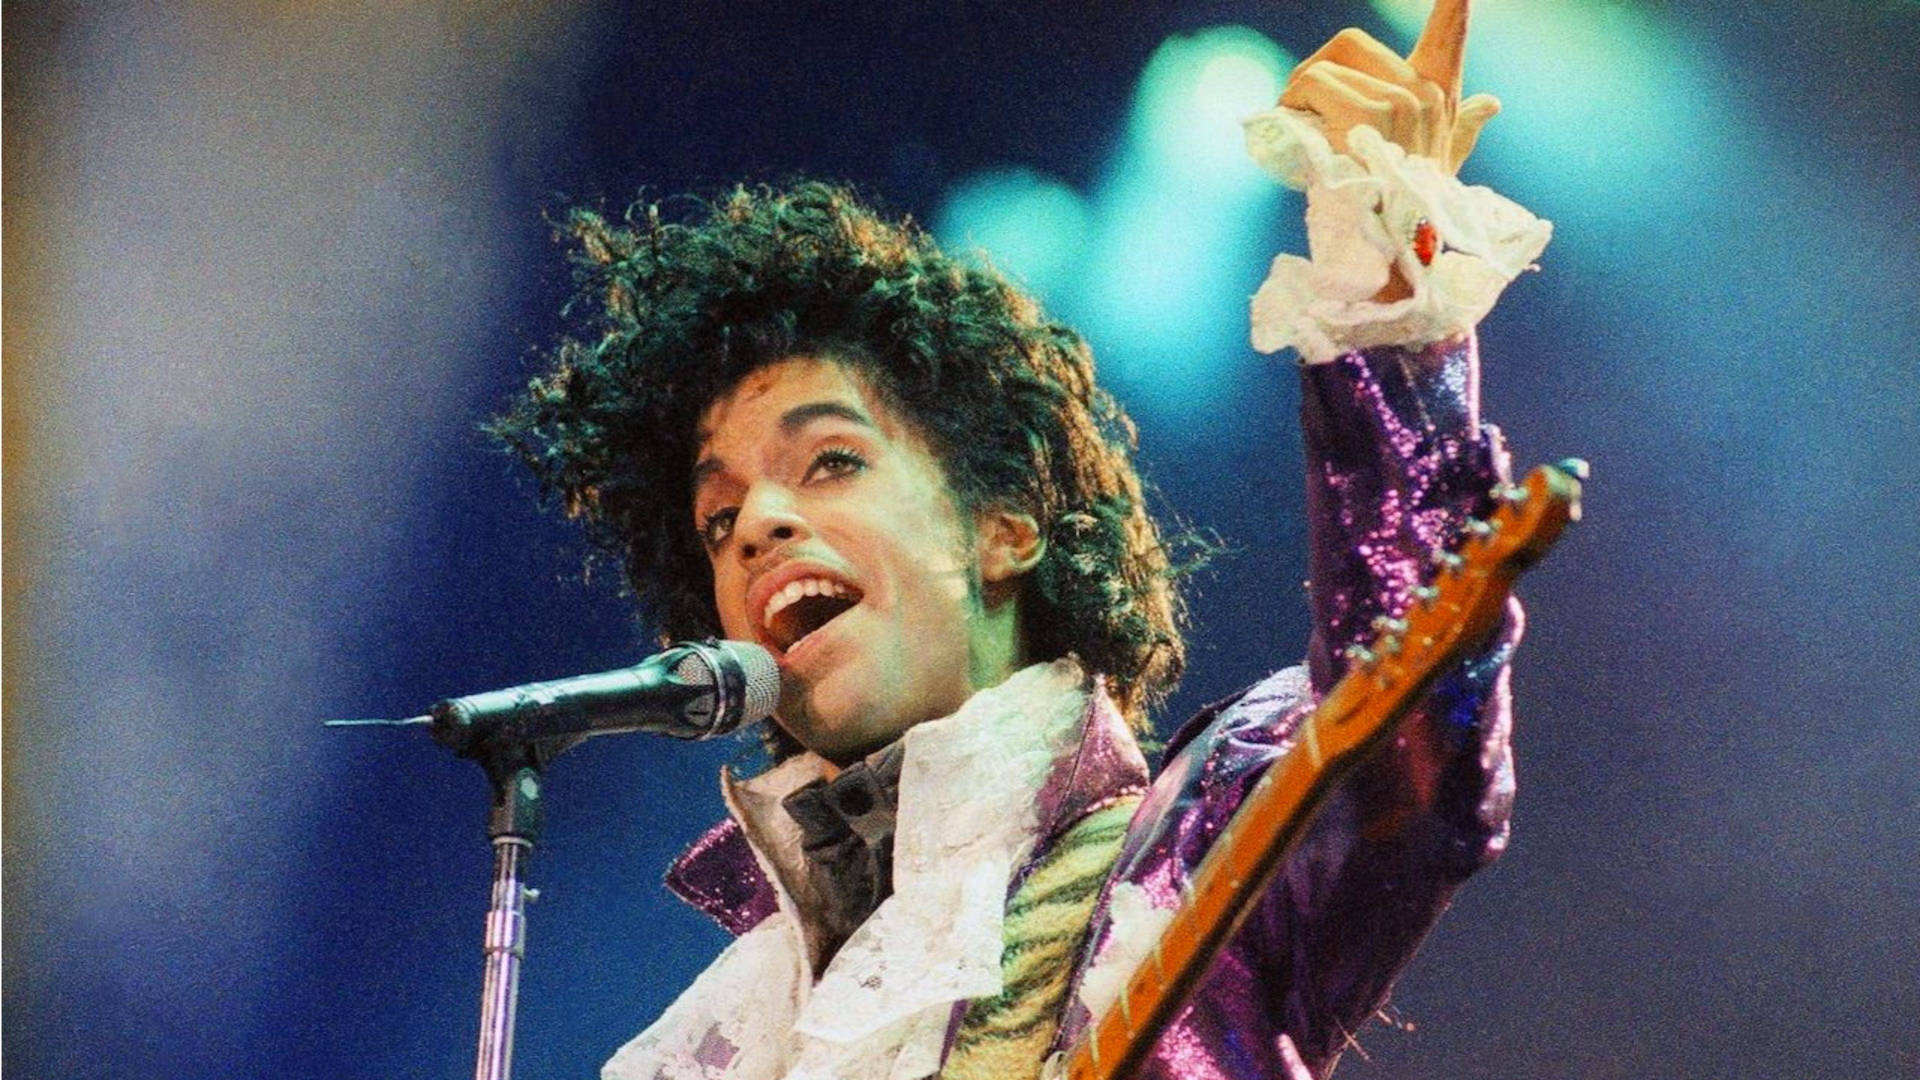 The Iconic Singer, Prince Playing A Guitar On Stage